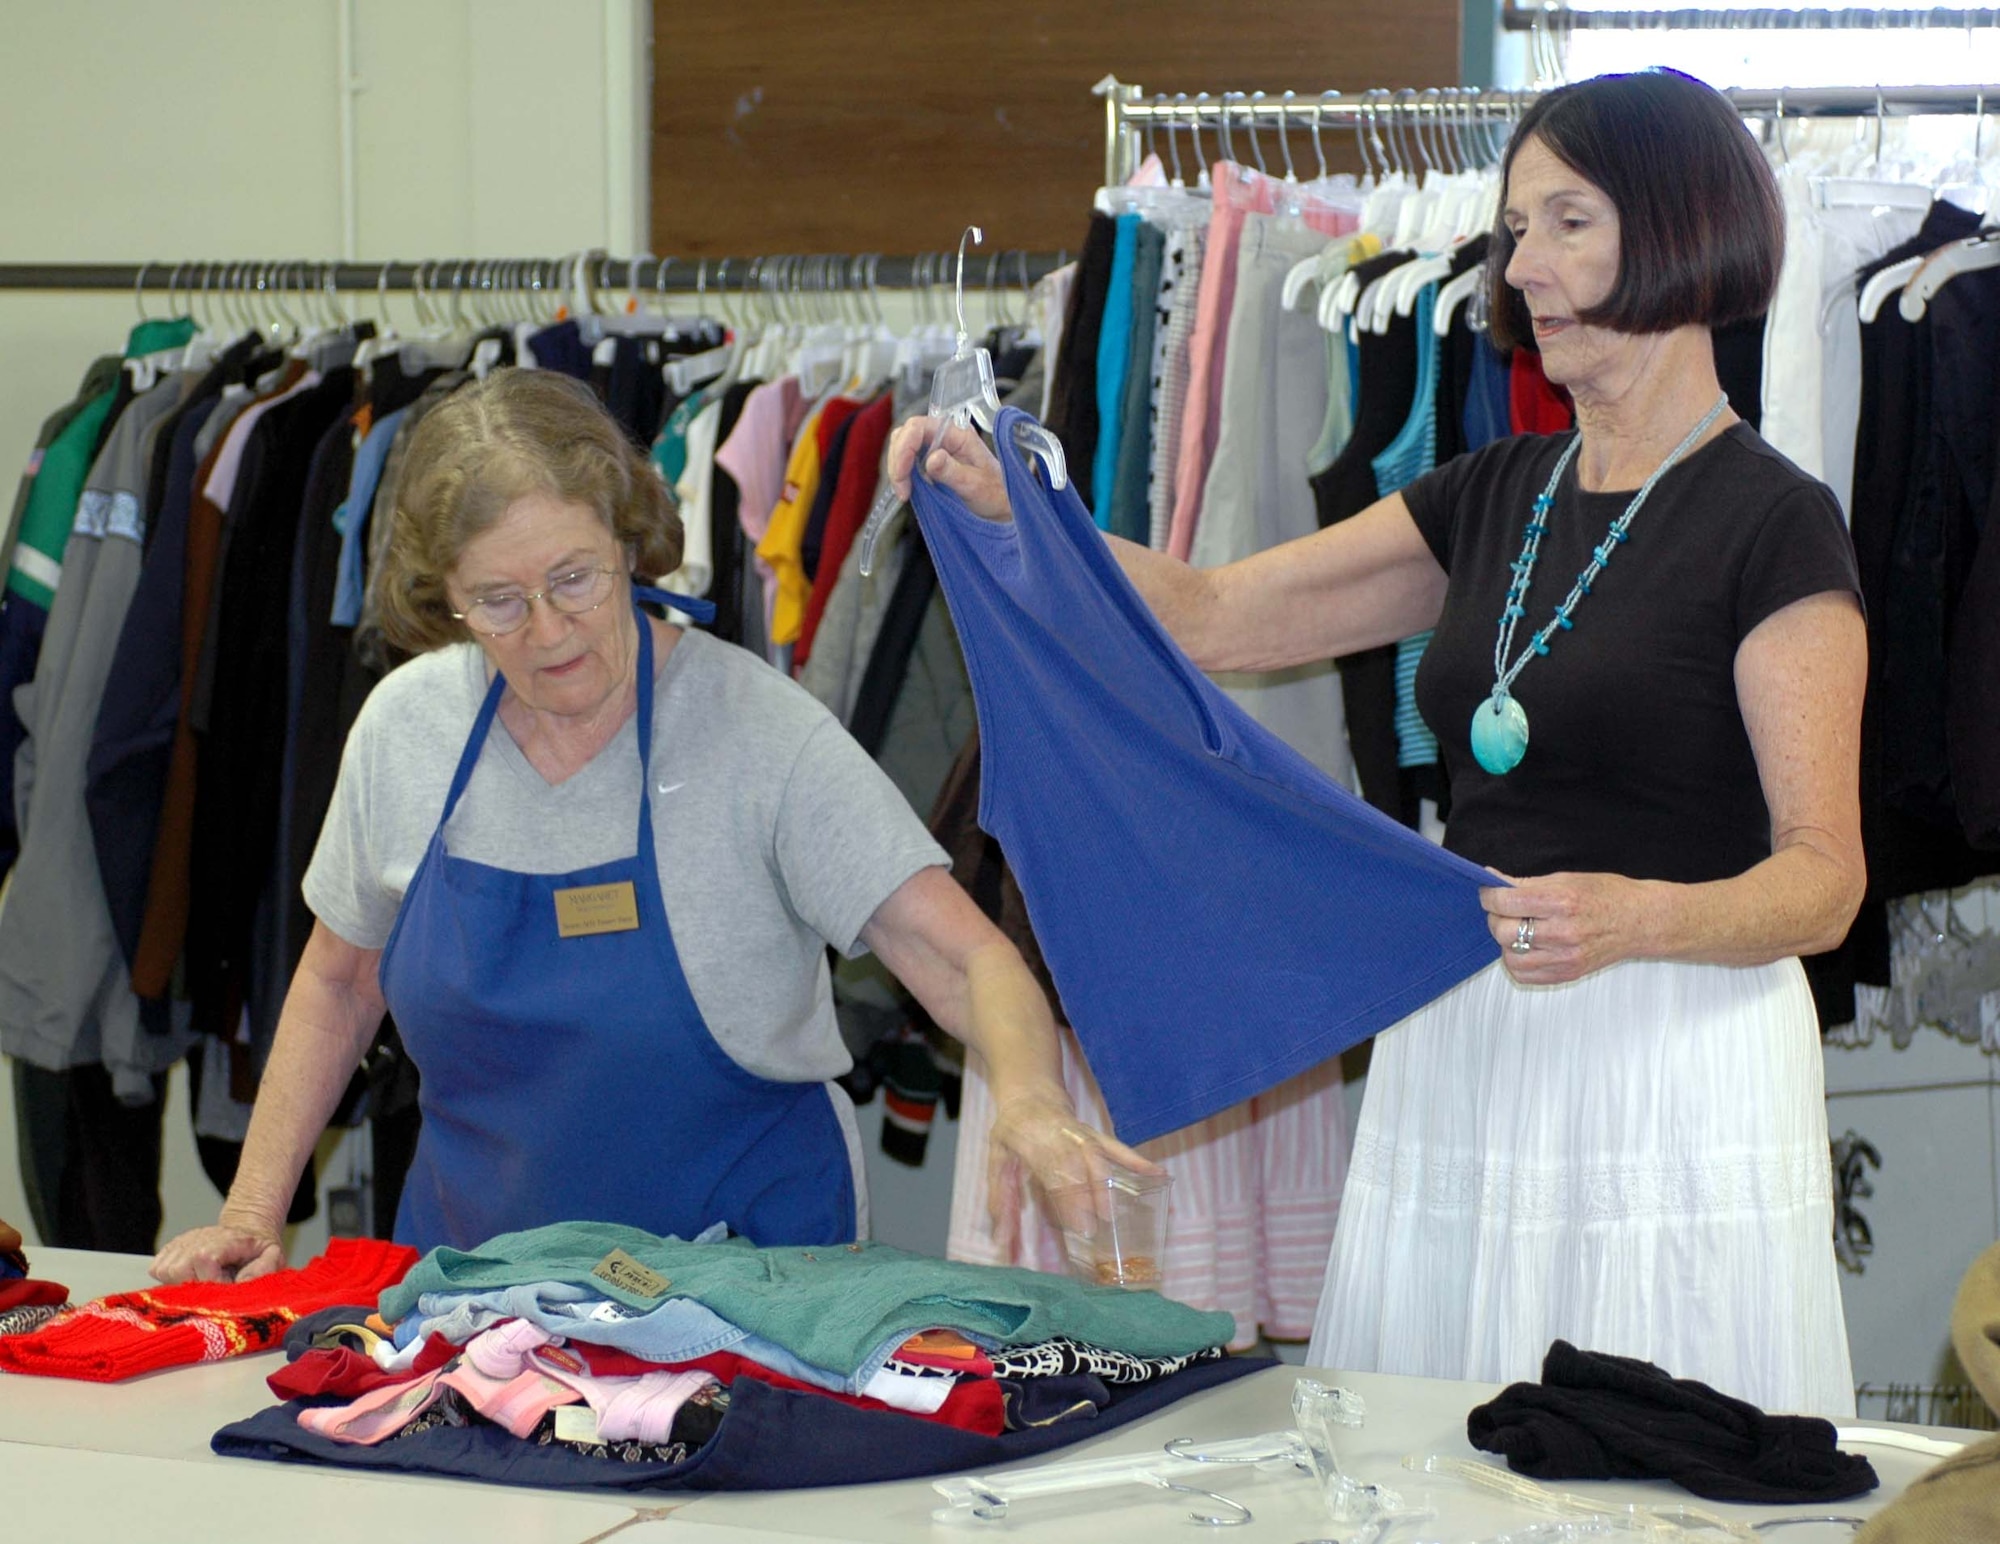 Volunteers Margaret Wheeler and Lois Horner sort donated shirts at the Thrift Shop. The shop relies on donations from servicemembers and their families. (U.S. Air Force photo/ Nick DeCicco)